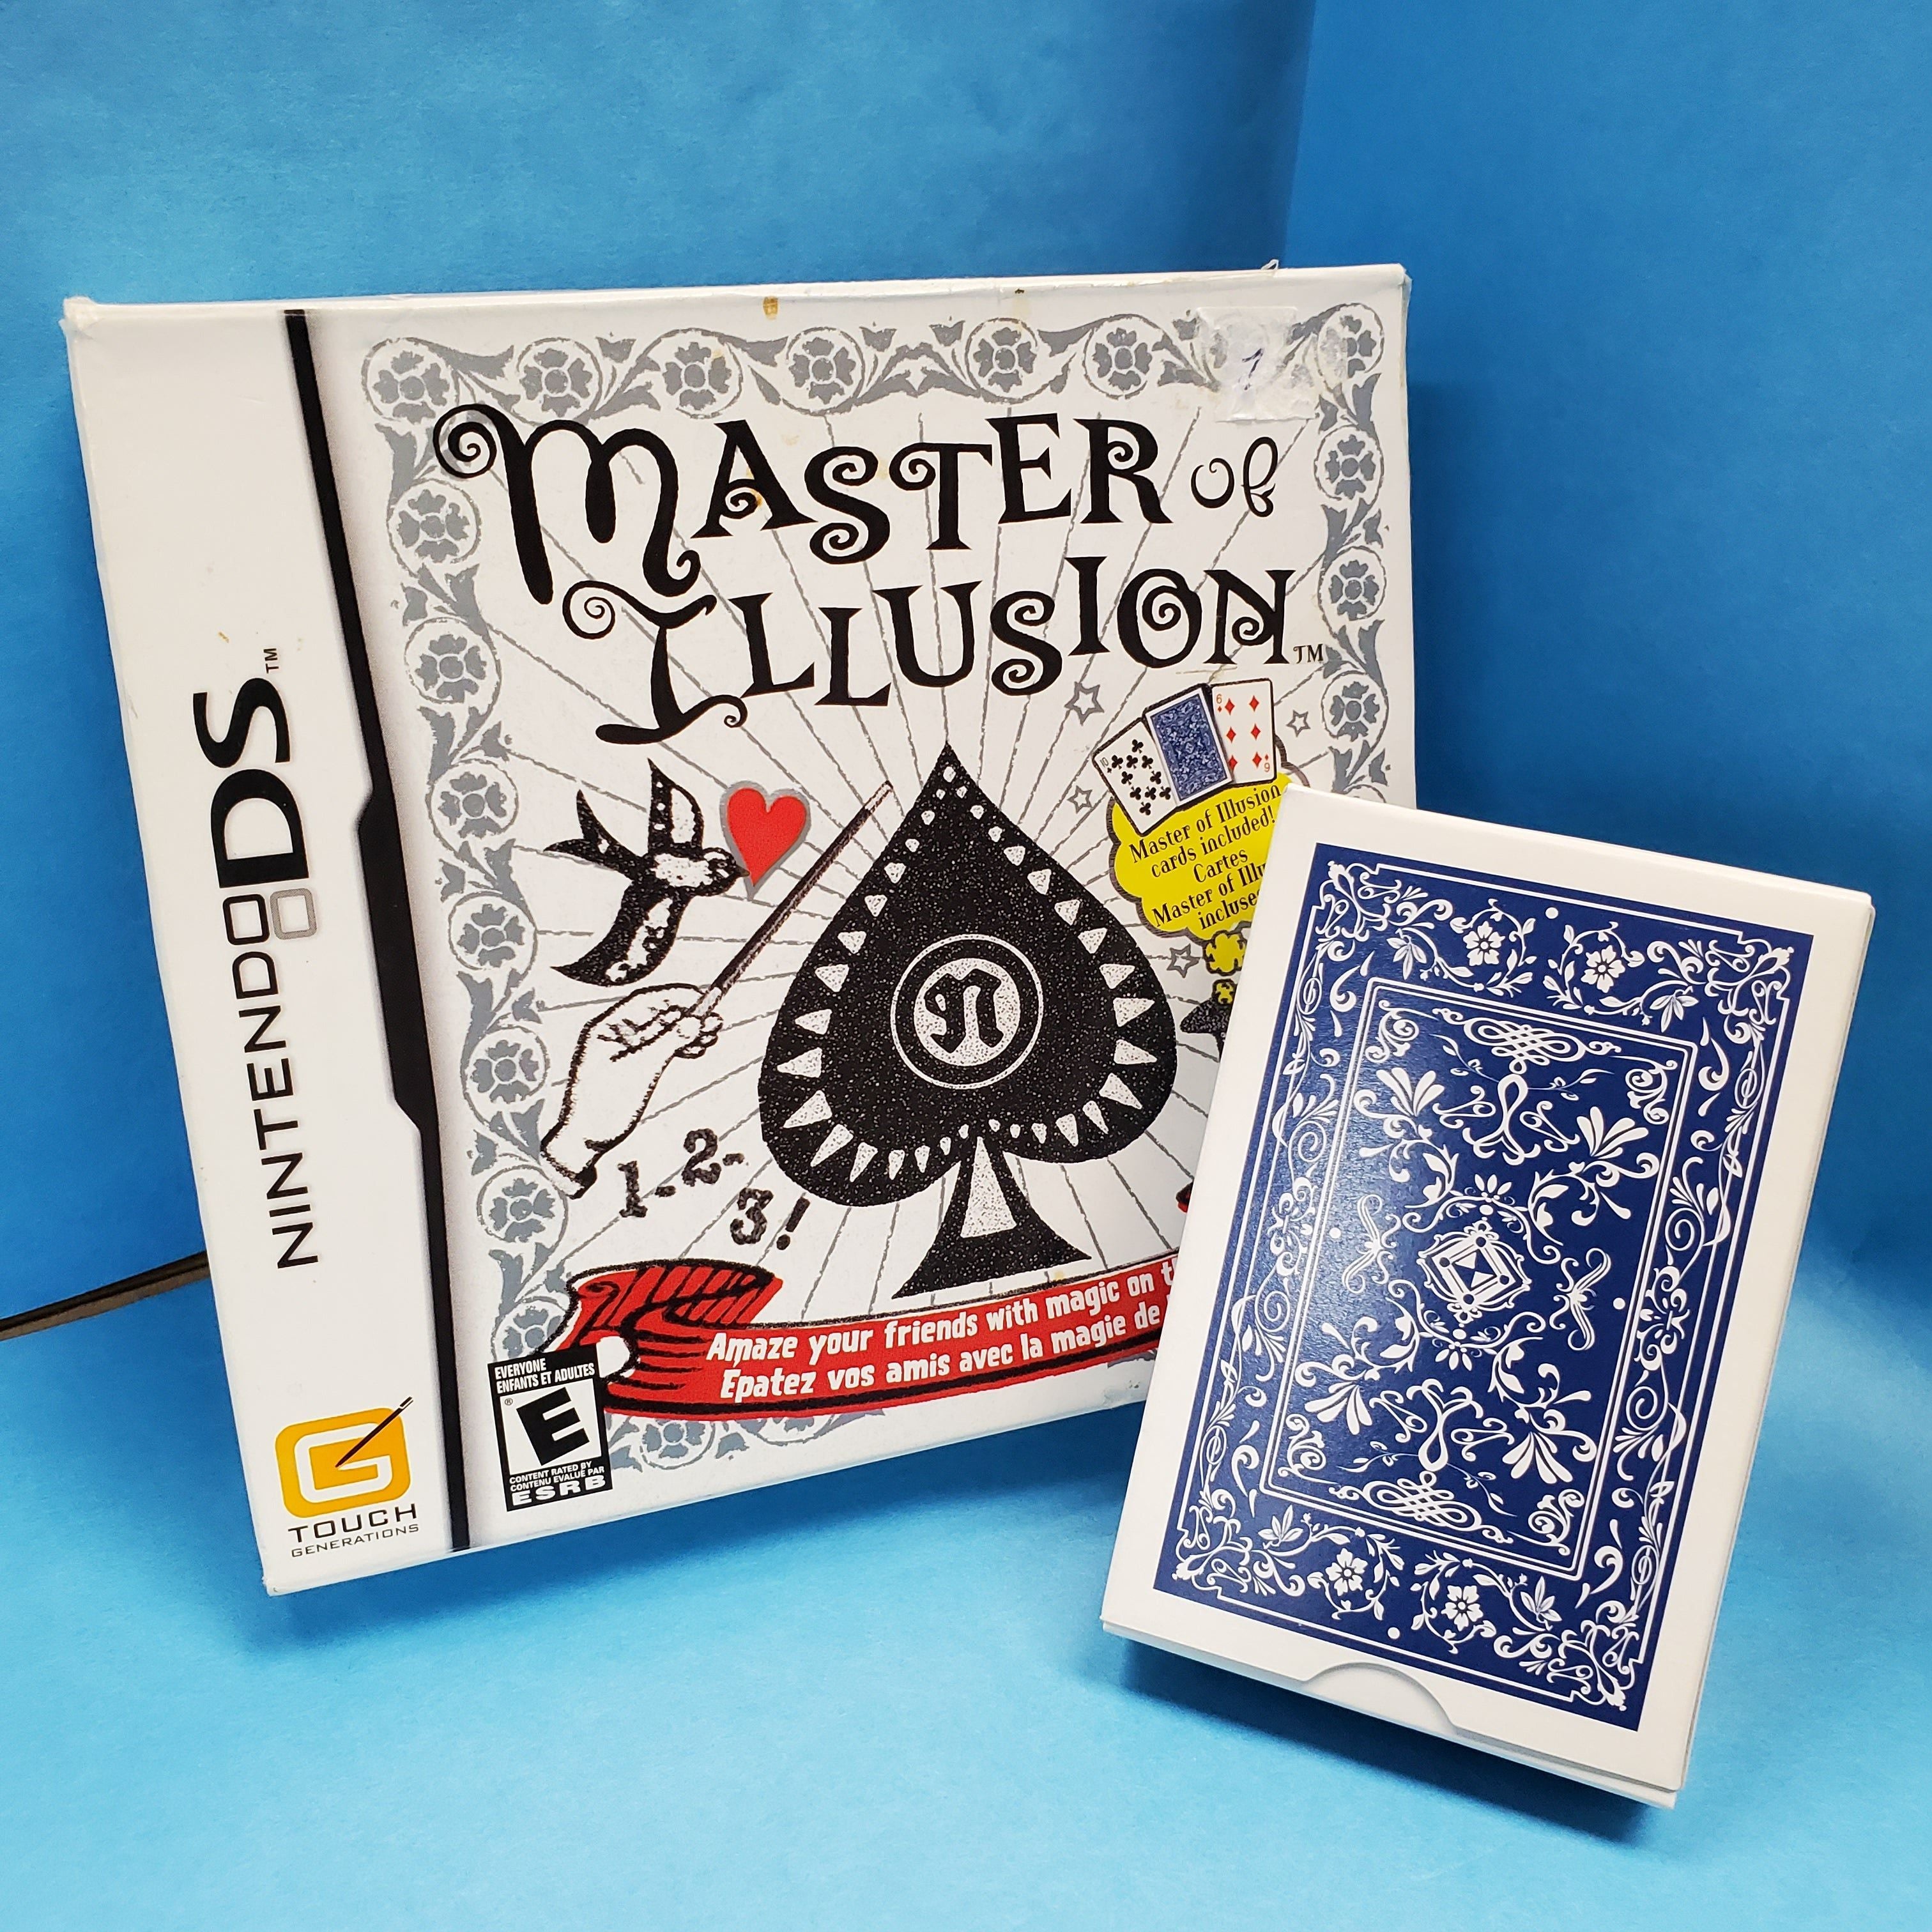 DS - Master of Illusion (complet avec cartes)